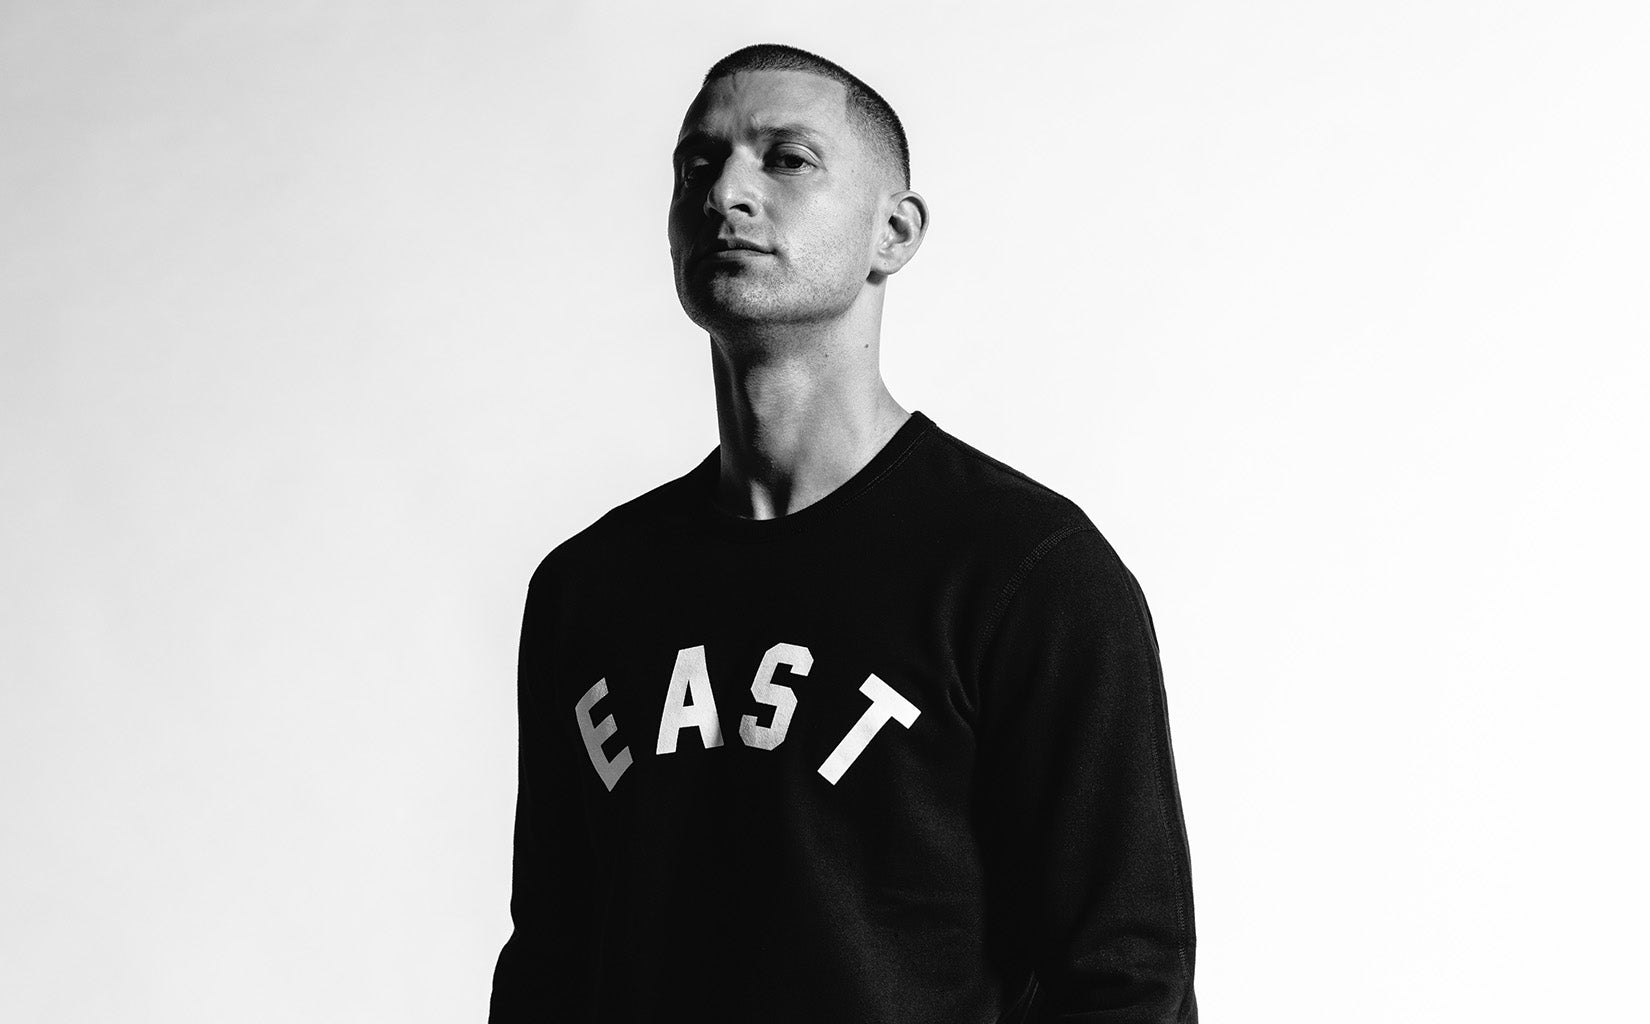 NBA All Star Collection x Reigning Champ